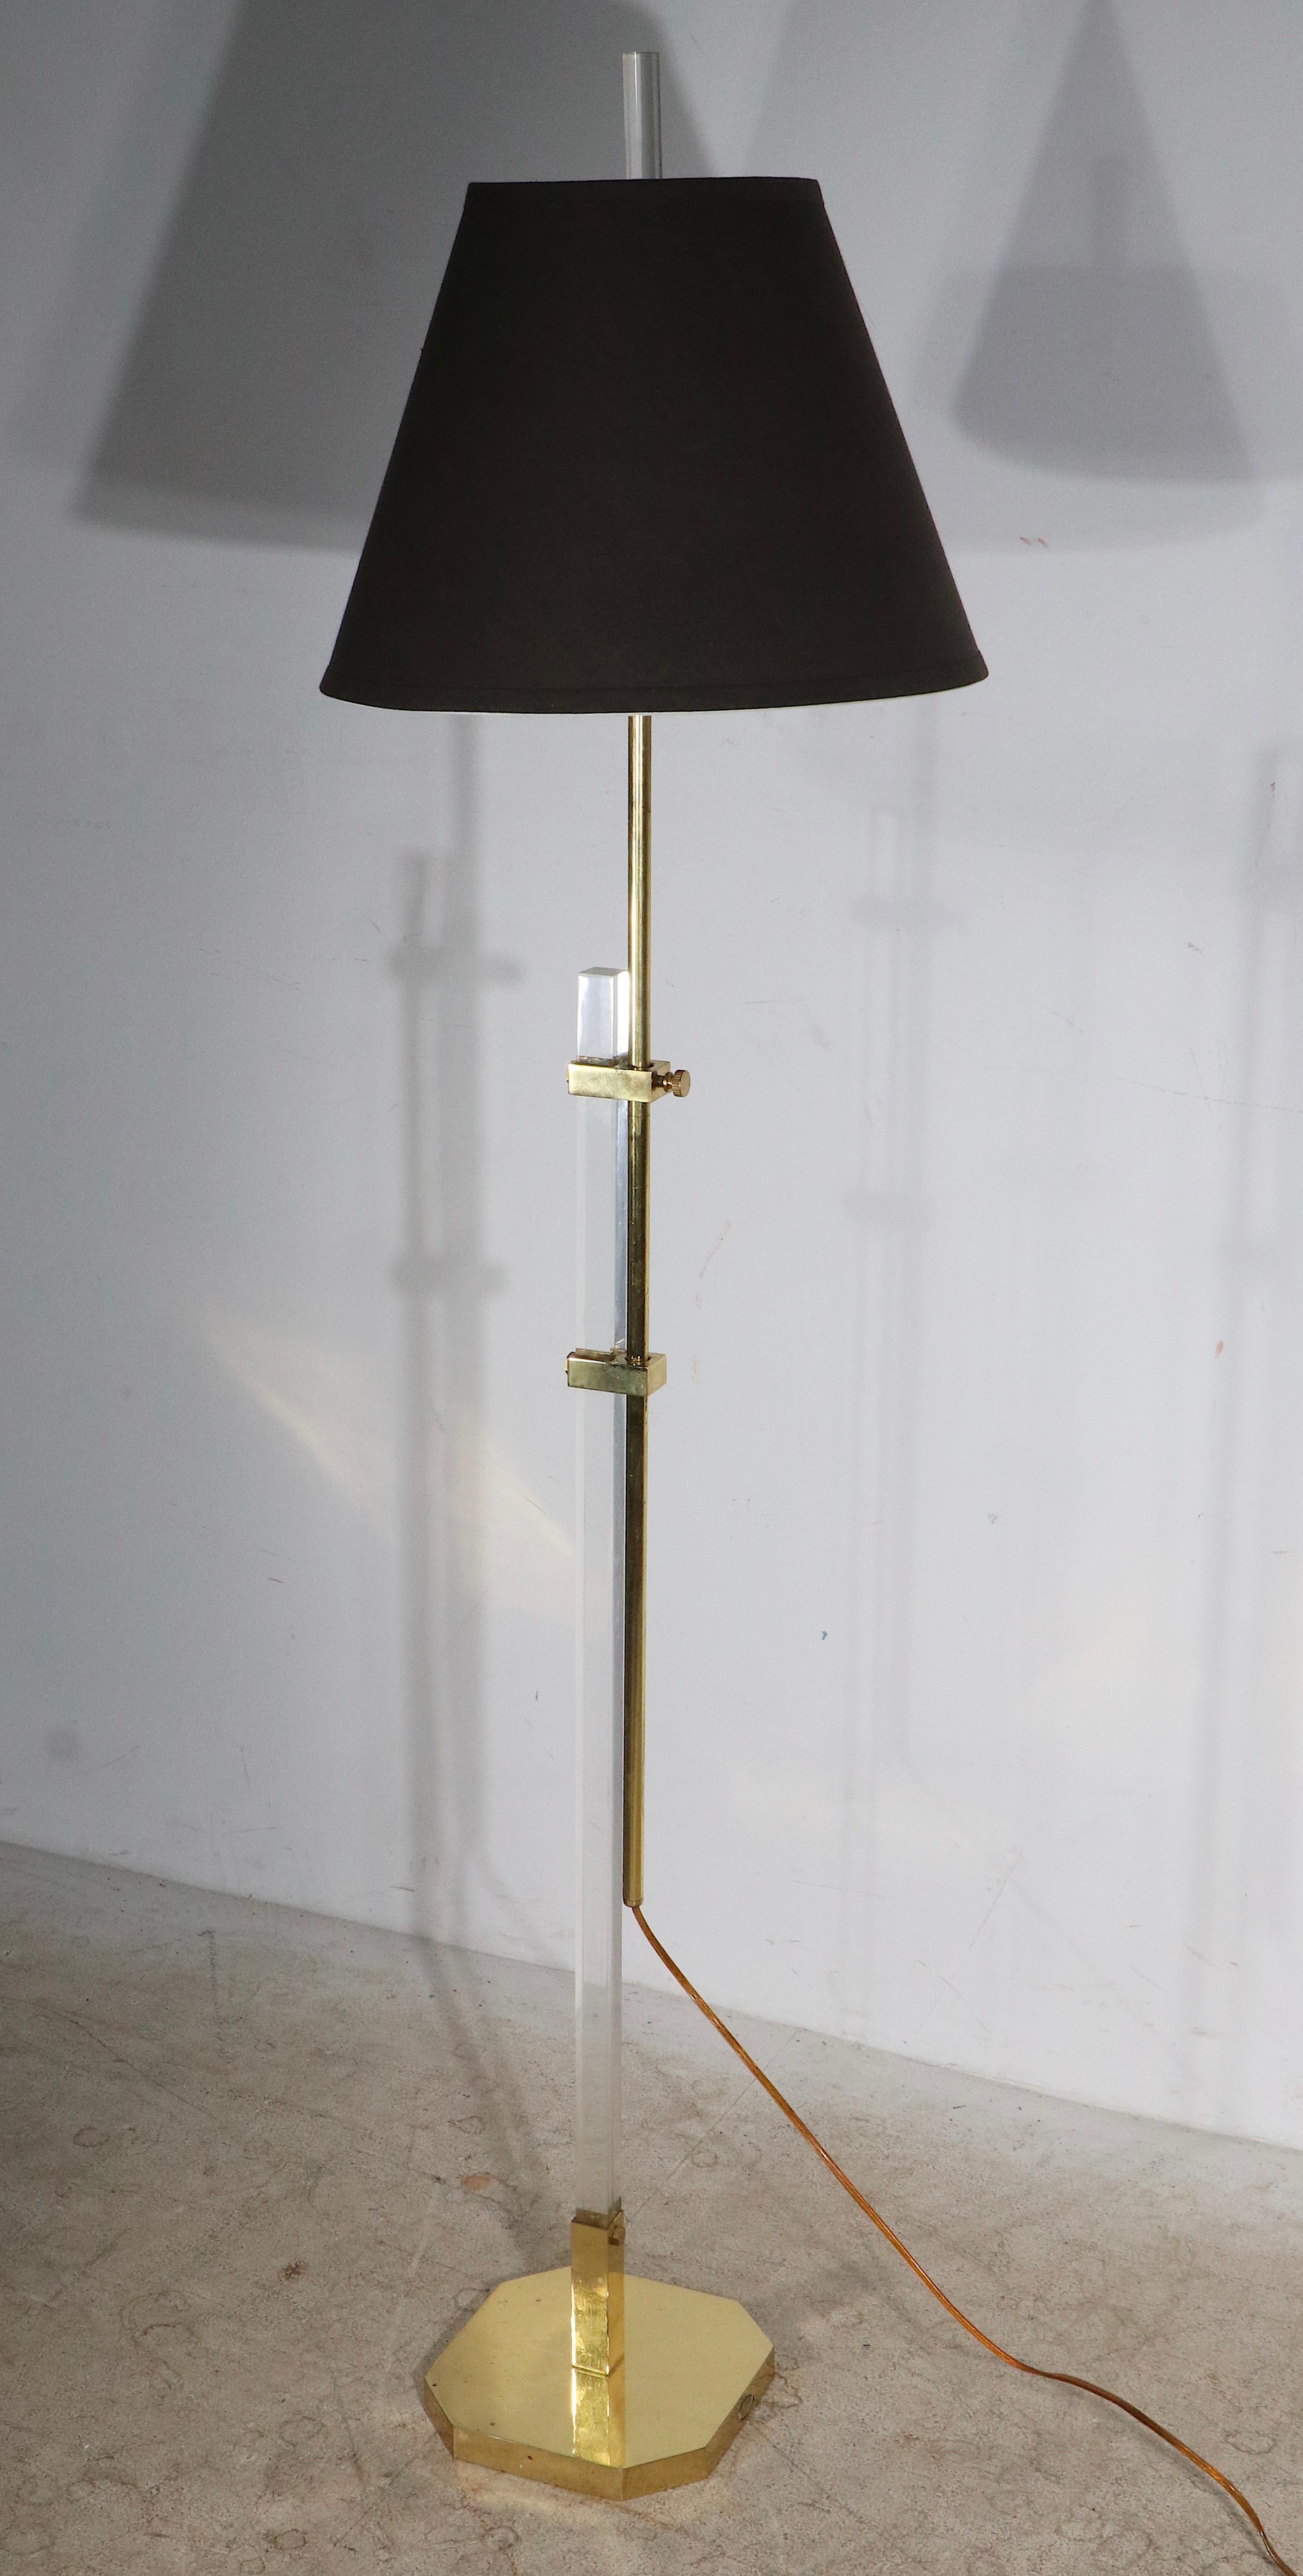  Adjustable Hollywood Regency Style Brass and Lucite Floor Lamp c. 1970/1980's For Sale 1